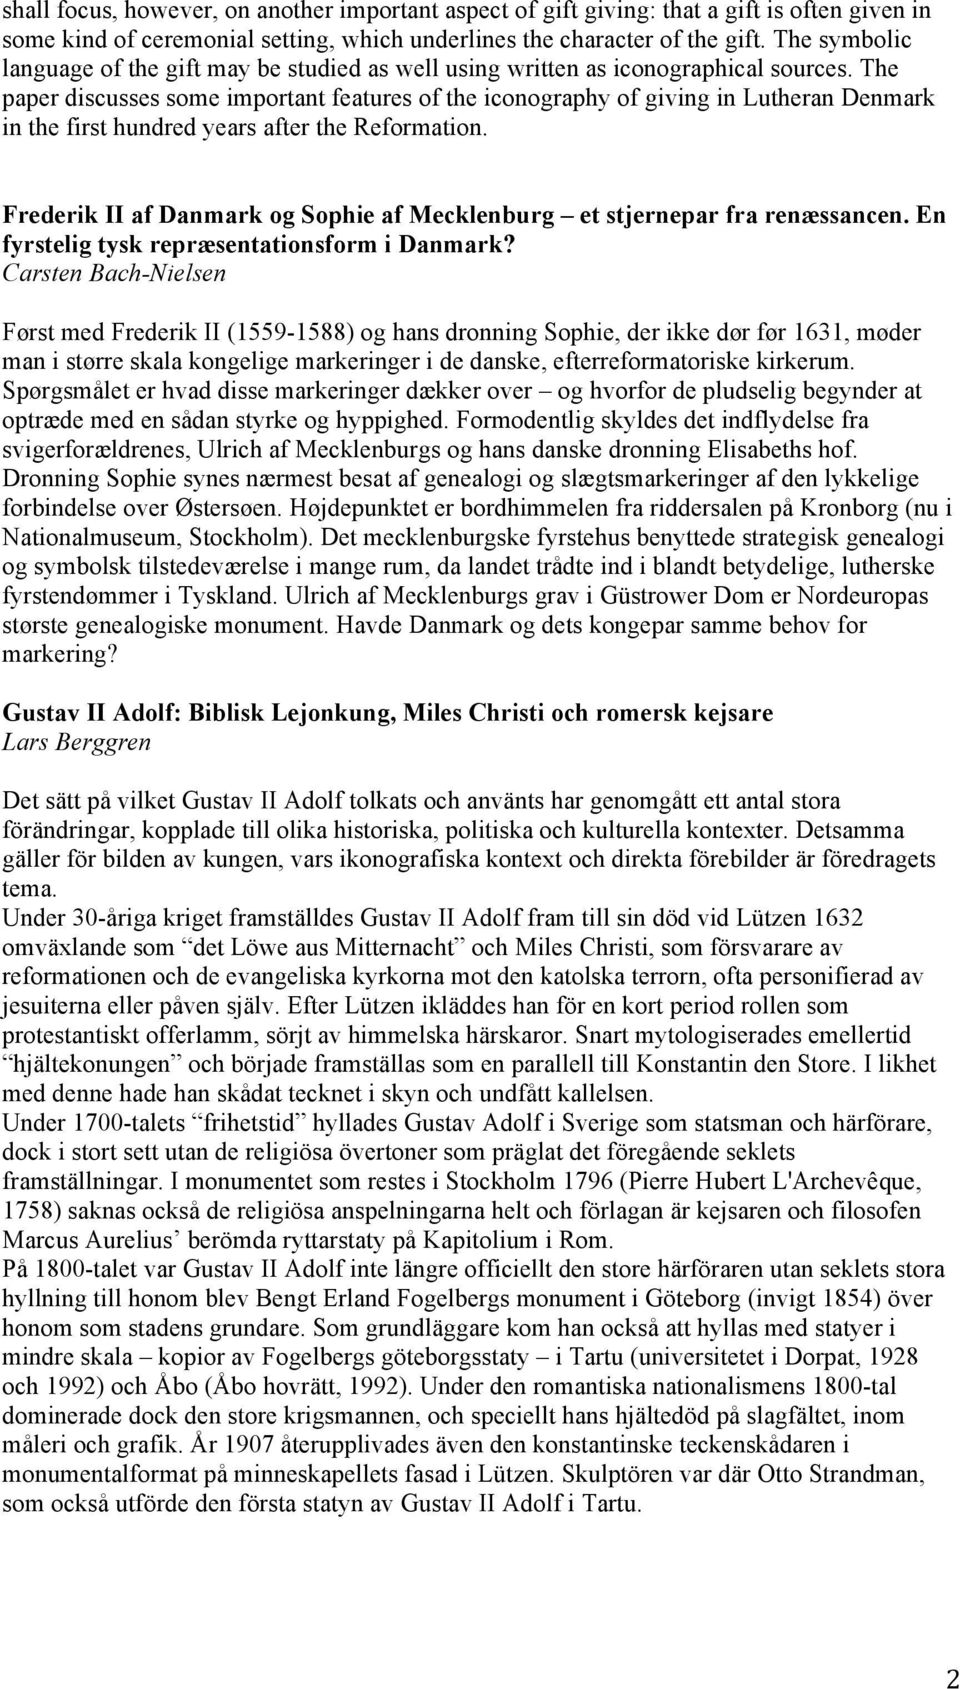 The paper discusses some important features of the iconography of giving in Lutheran Denmark in the first hundred years after the Reformation.